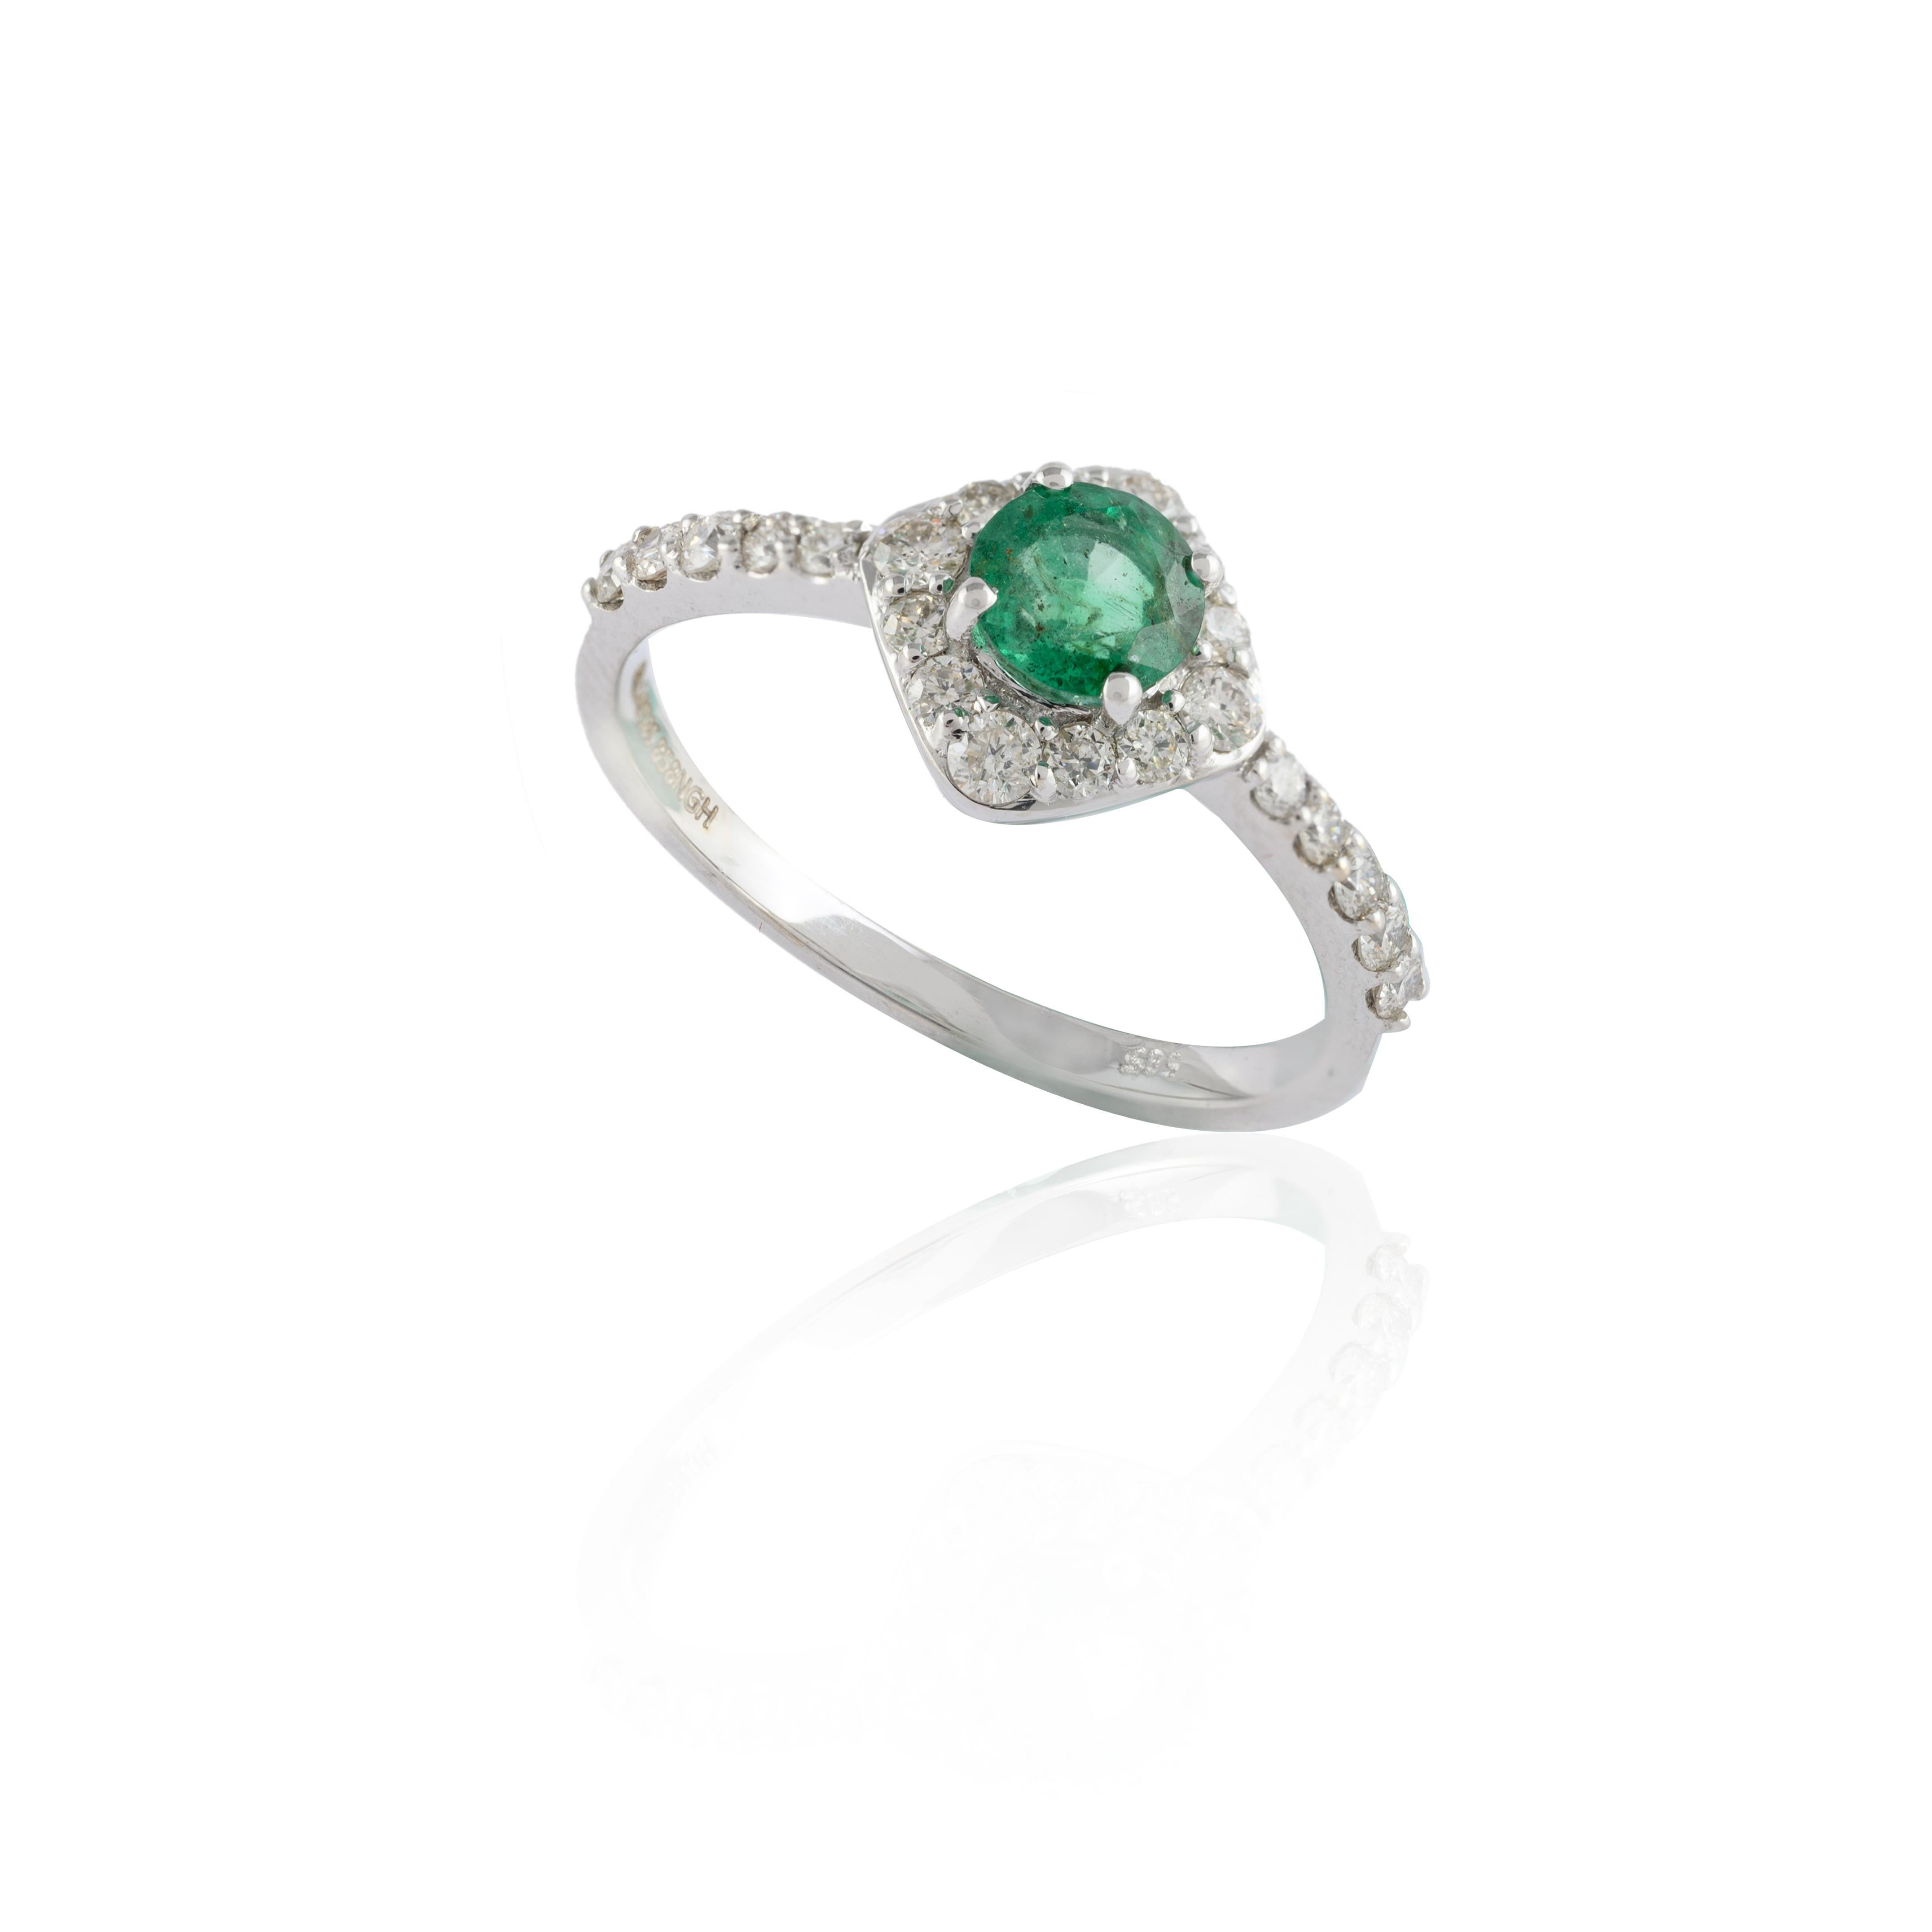 For Sale:  Dainty Halo Diamond Emerald Ring Handcrafted in 14k Solid White Gold 11